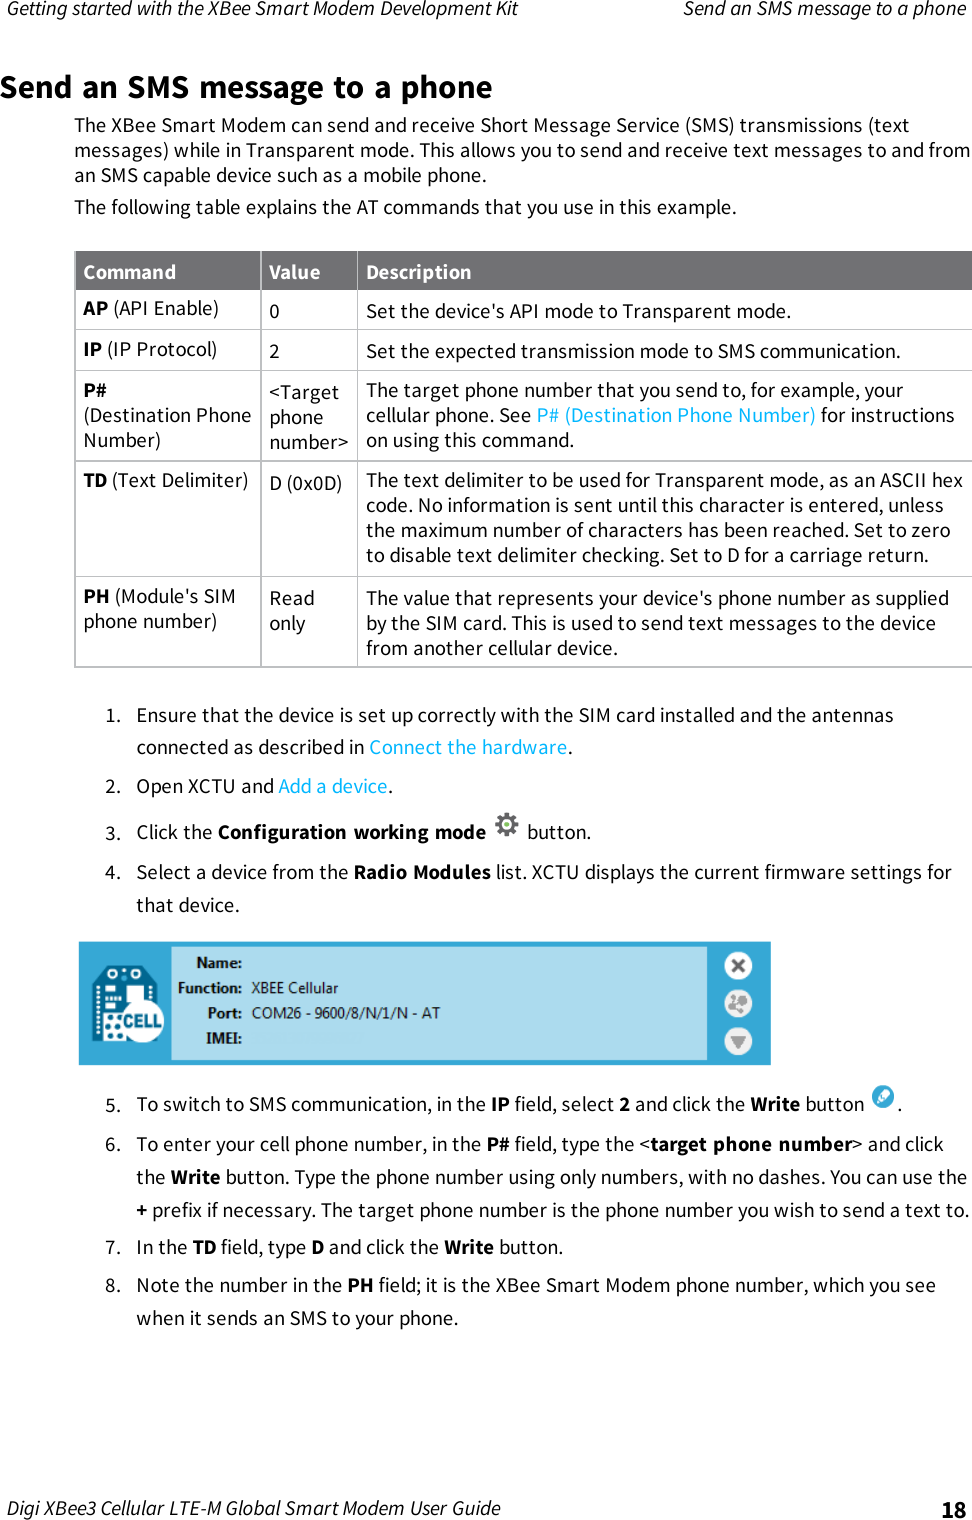 Page 18 of Digi XB3M1 XBee3 Cellular LTE-M User Manual 